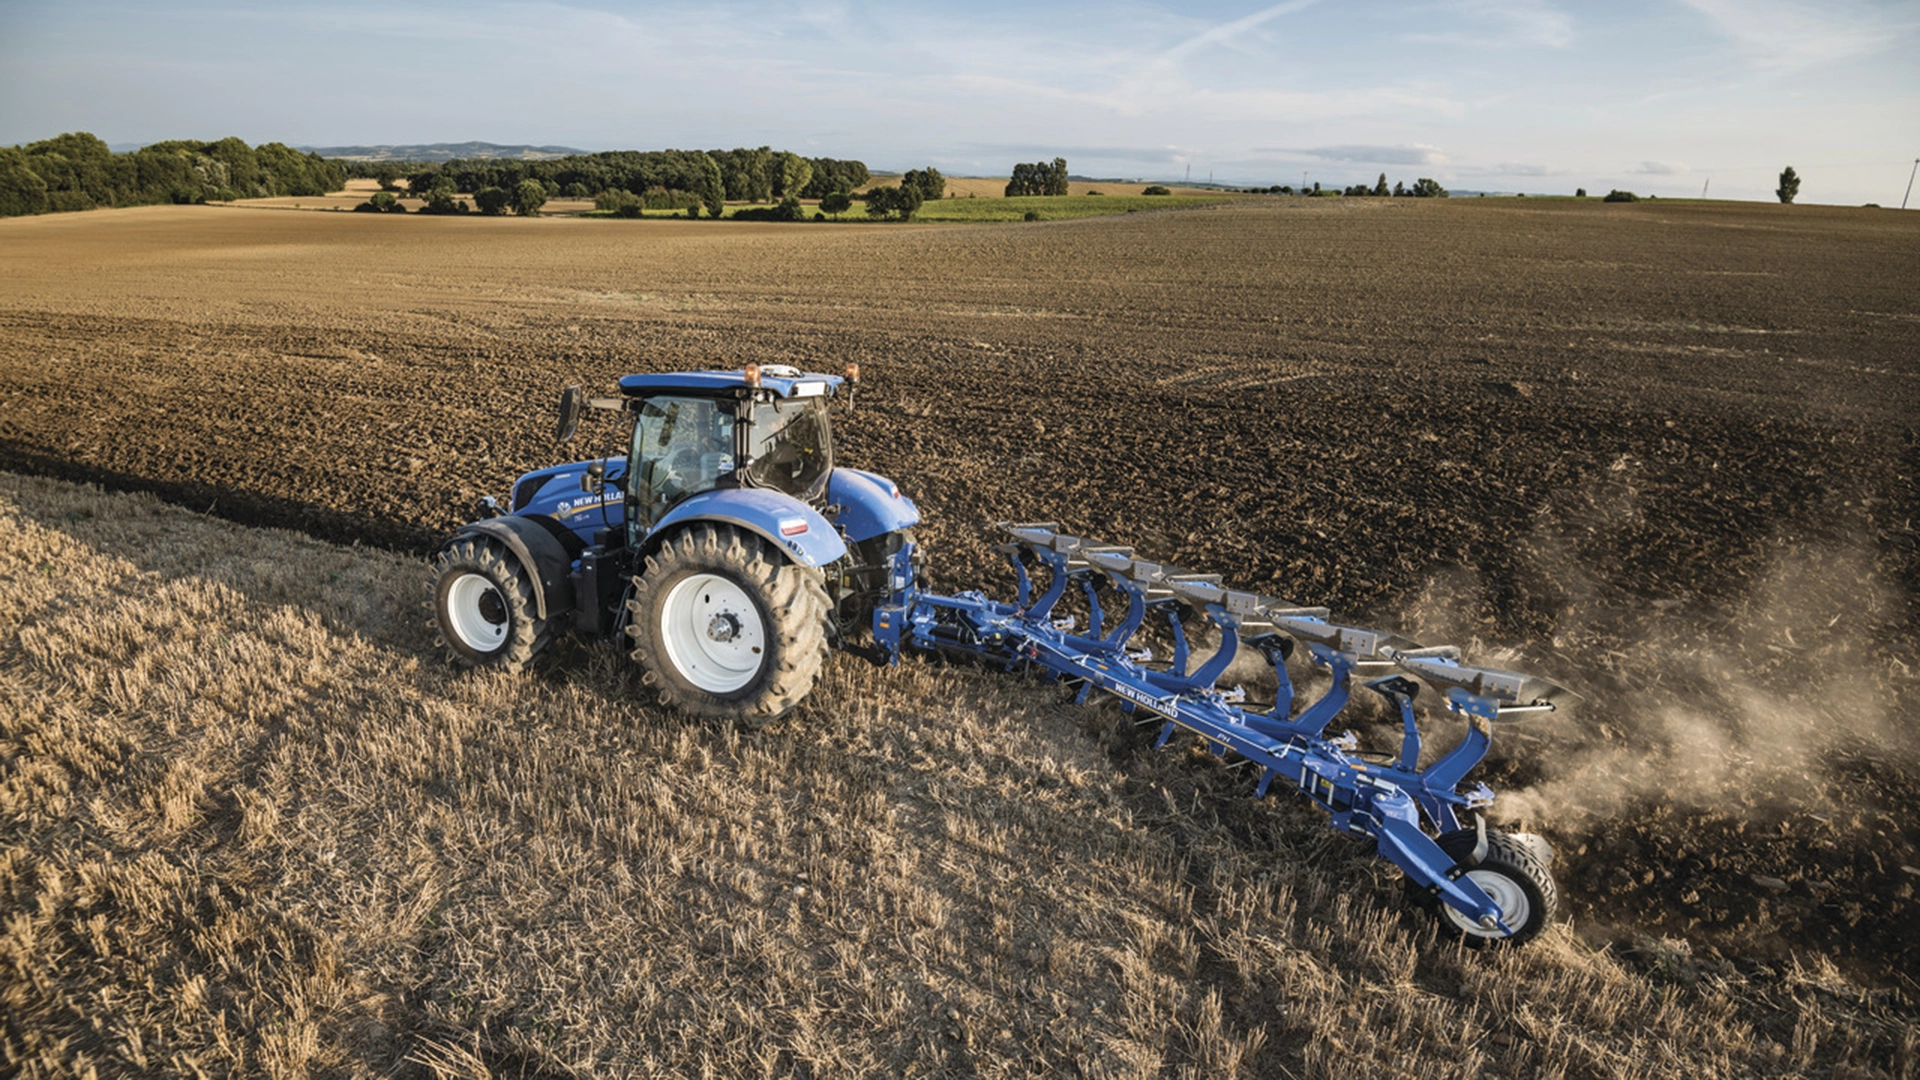 New Holland's Tractor with a 5 furrow reversible plough